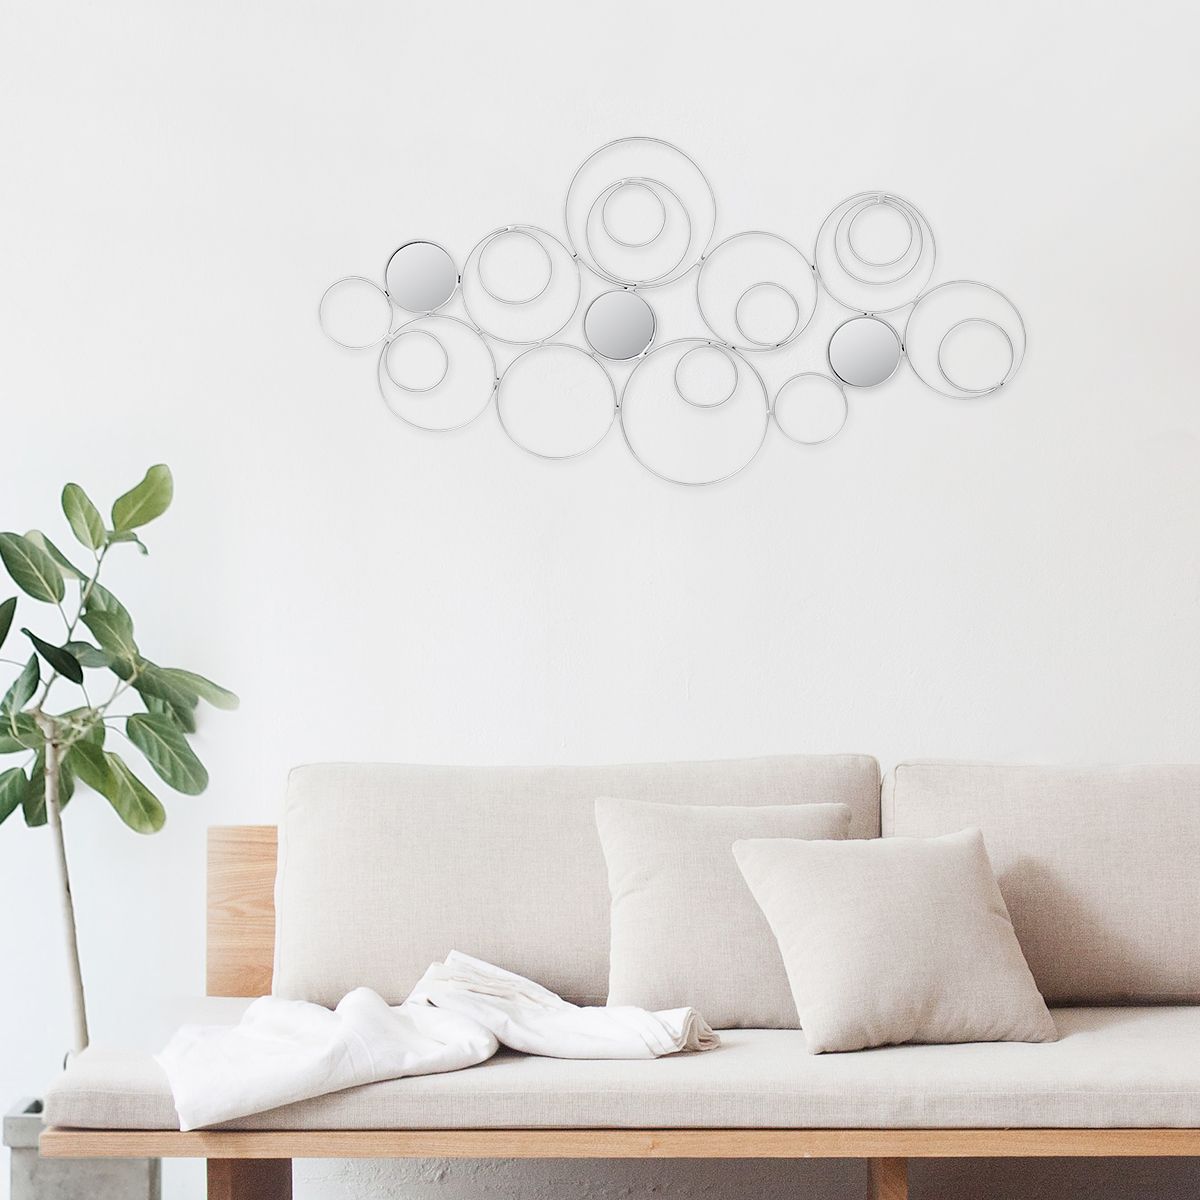 Wall-Mirror-Abstract-Metal-Hanging-Ring-Round-Sculpture-Home-Art-Decoration-1762500